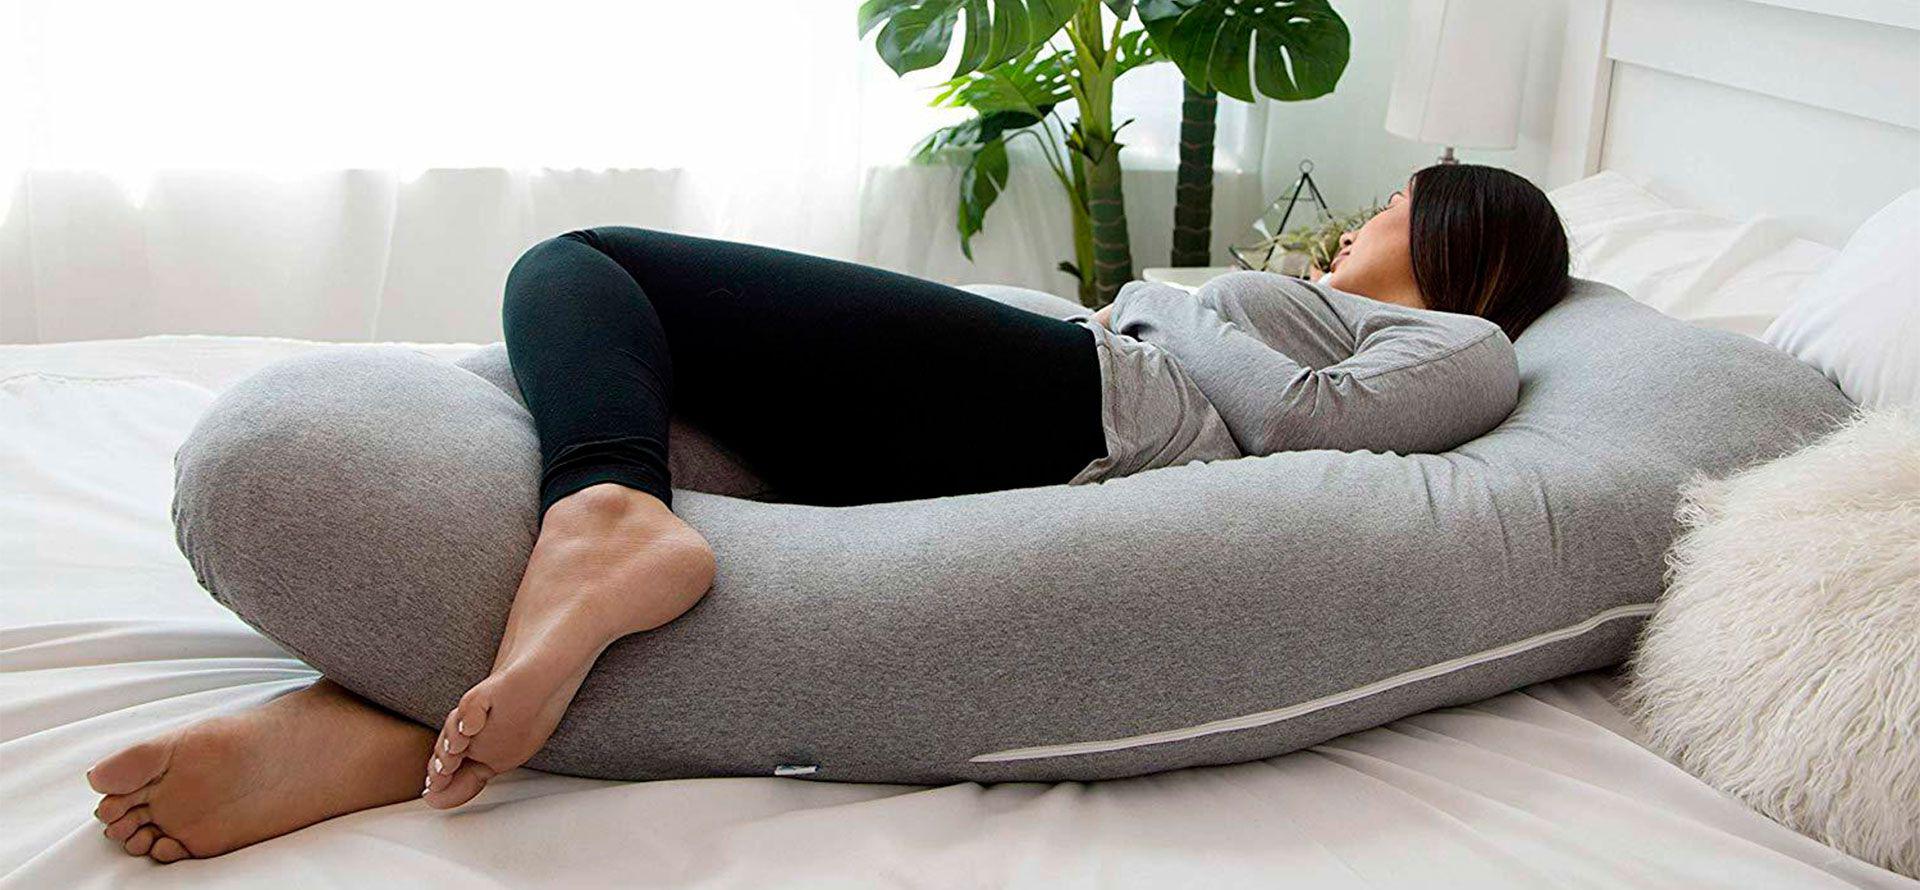 A woman sleeping with pregnancy pillow.